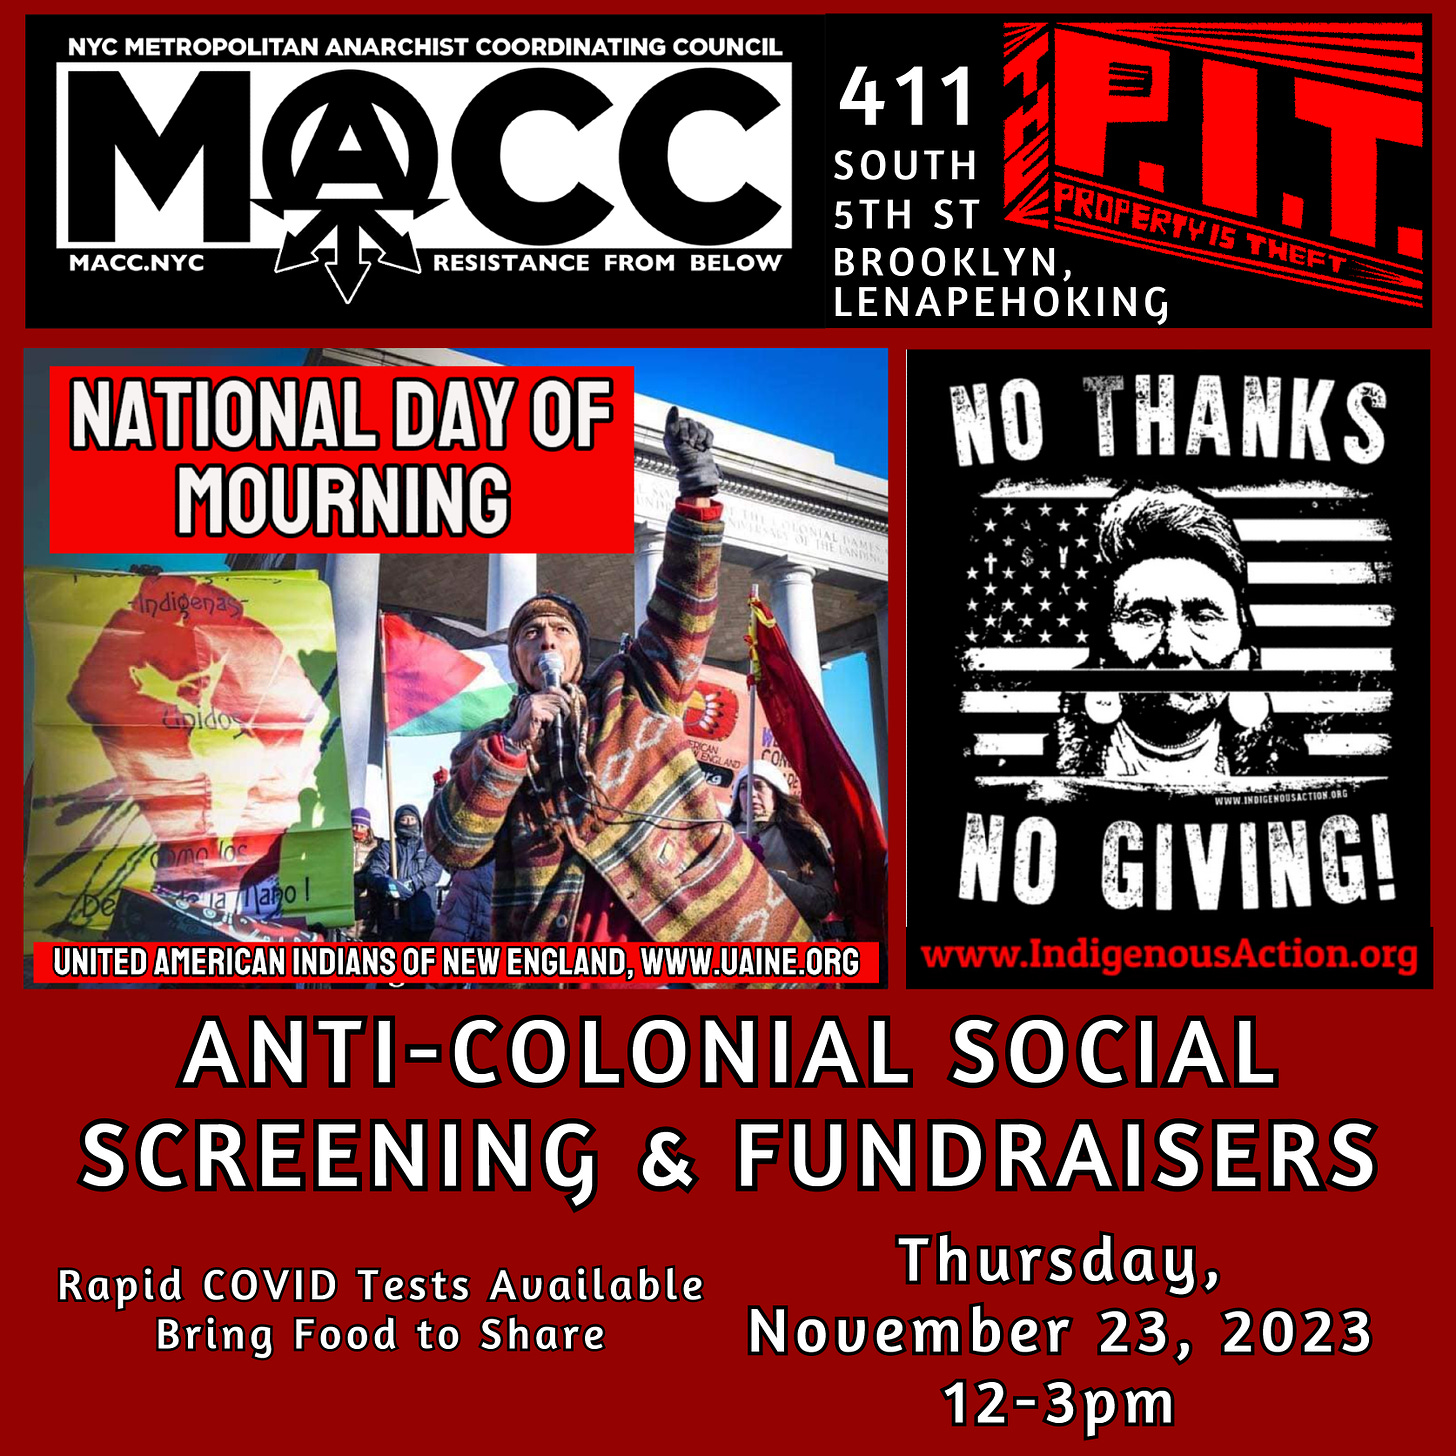 [ALT-TEXT for Event Flyer: Anti-Colonial Social Screening & Fundraisers event hosted by Metropolitan Anarchist Coordinating Council (MACC NYC) & the PIT at 411 S 5th Street, Brooklyn, Lenapehoking. Thursday, November 23, 2023 12-3 pm to support National Day of Mourning from United American Indians of New England UAINE.org and No Thanks No Giving IndigenousAction.org, Rapid COVID tests available, Bring a Dish to Share]